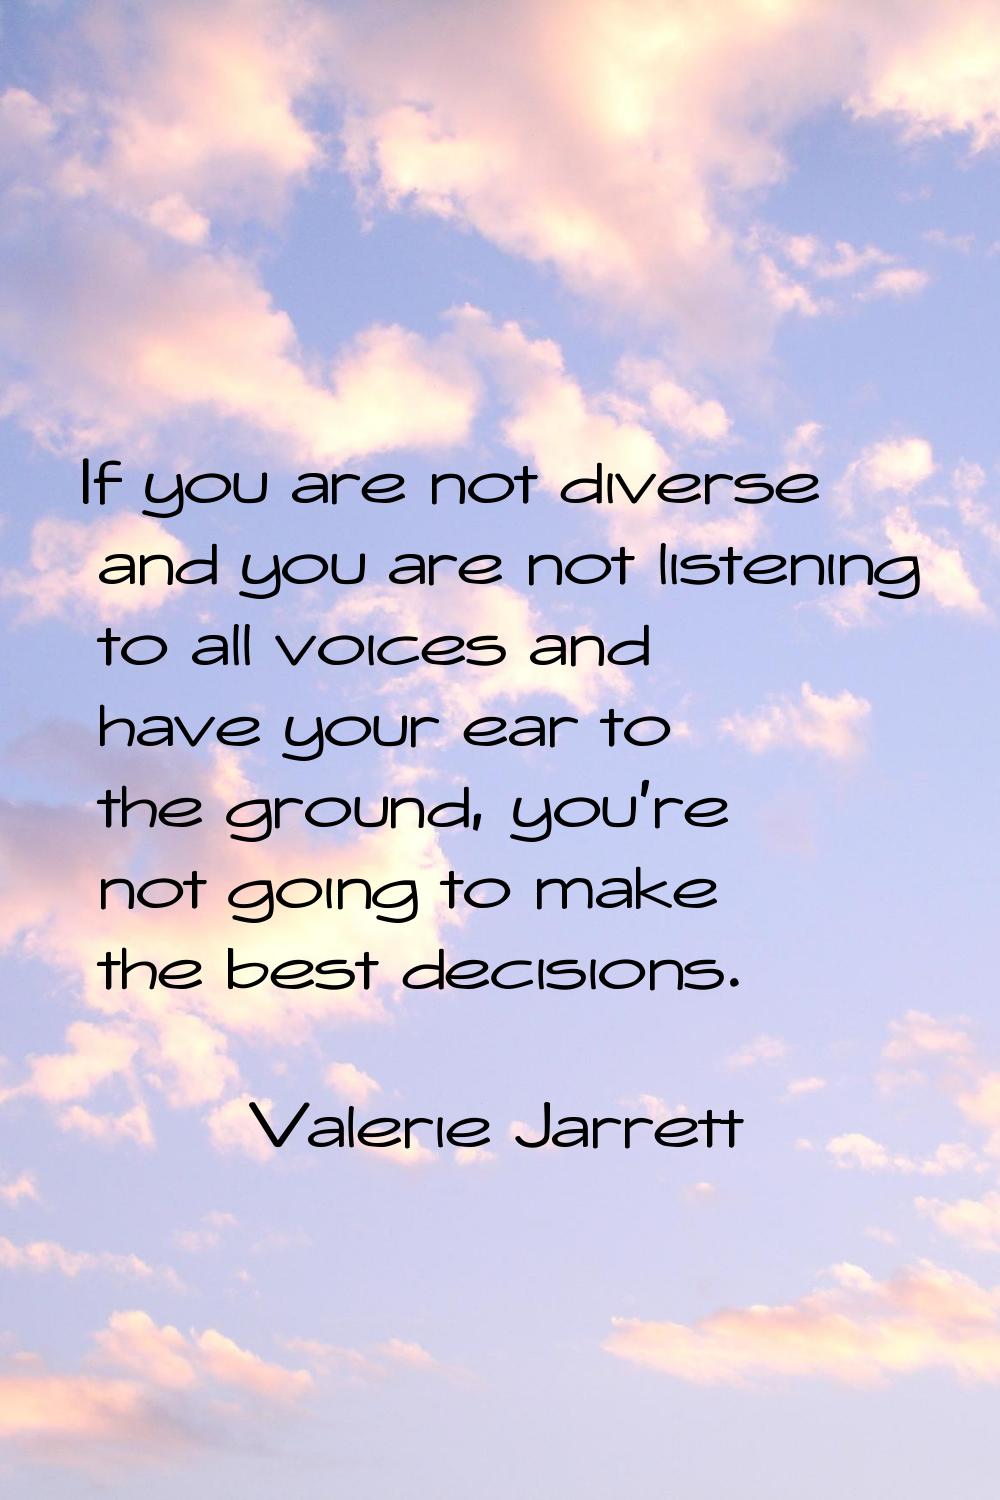 If you are not diverse and you are not listening to all voices and have your ear to the ground, you